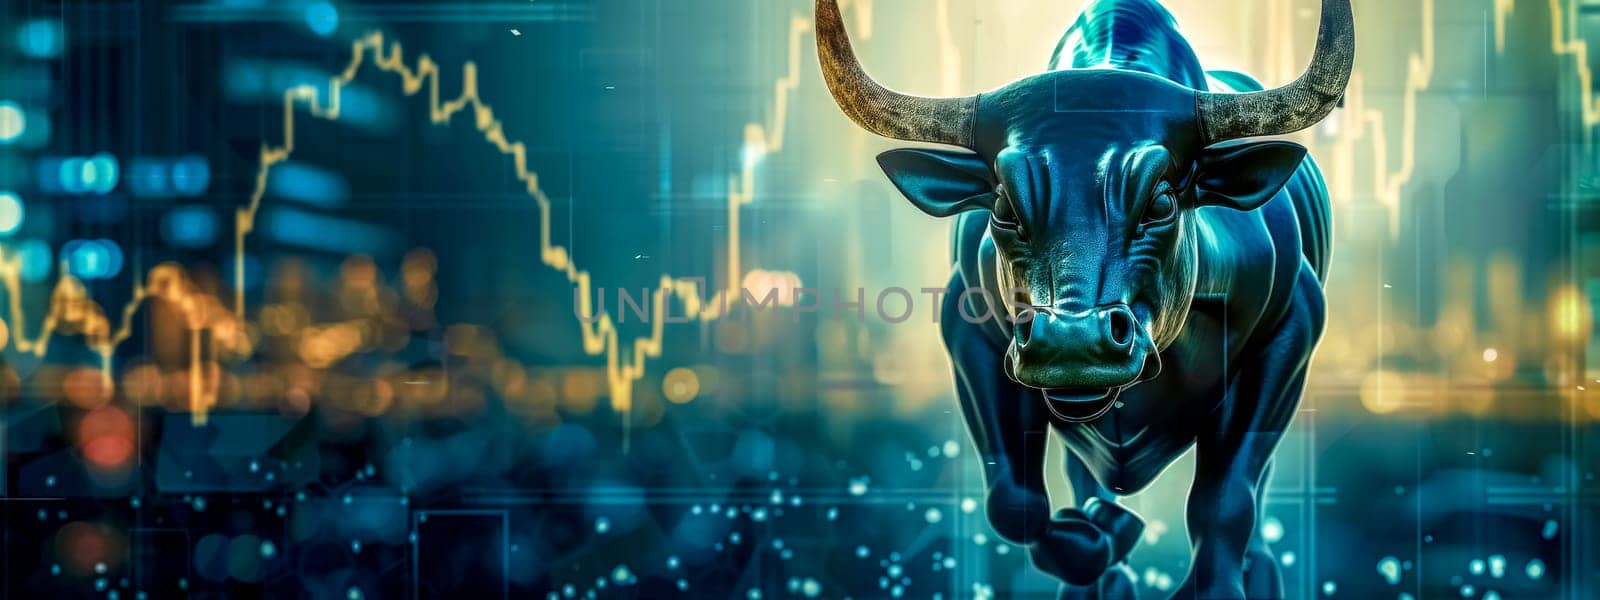 Charging bull market concept against urban financial background by Edophoto